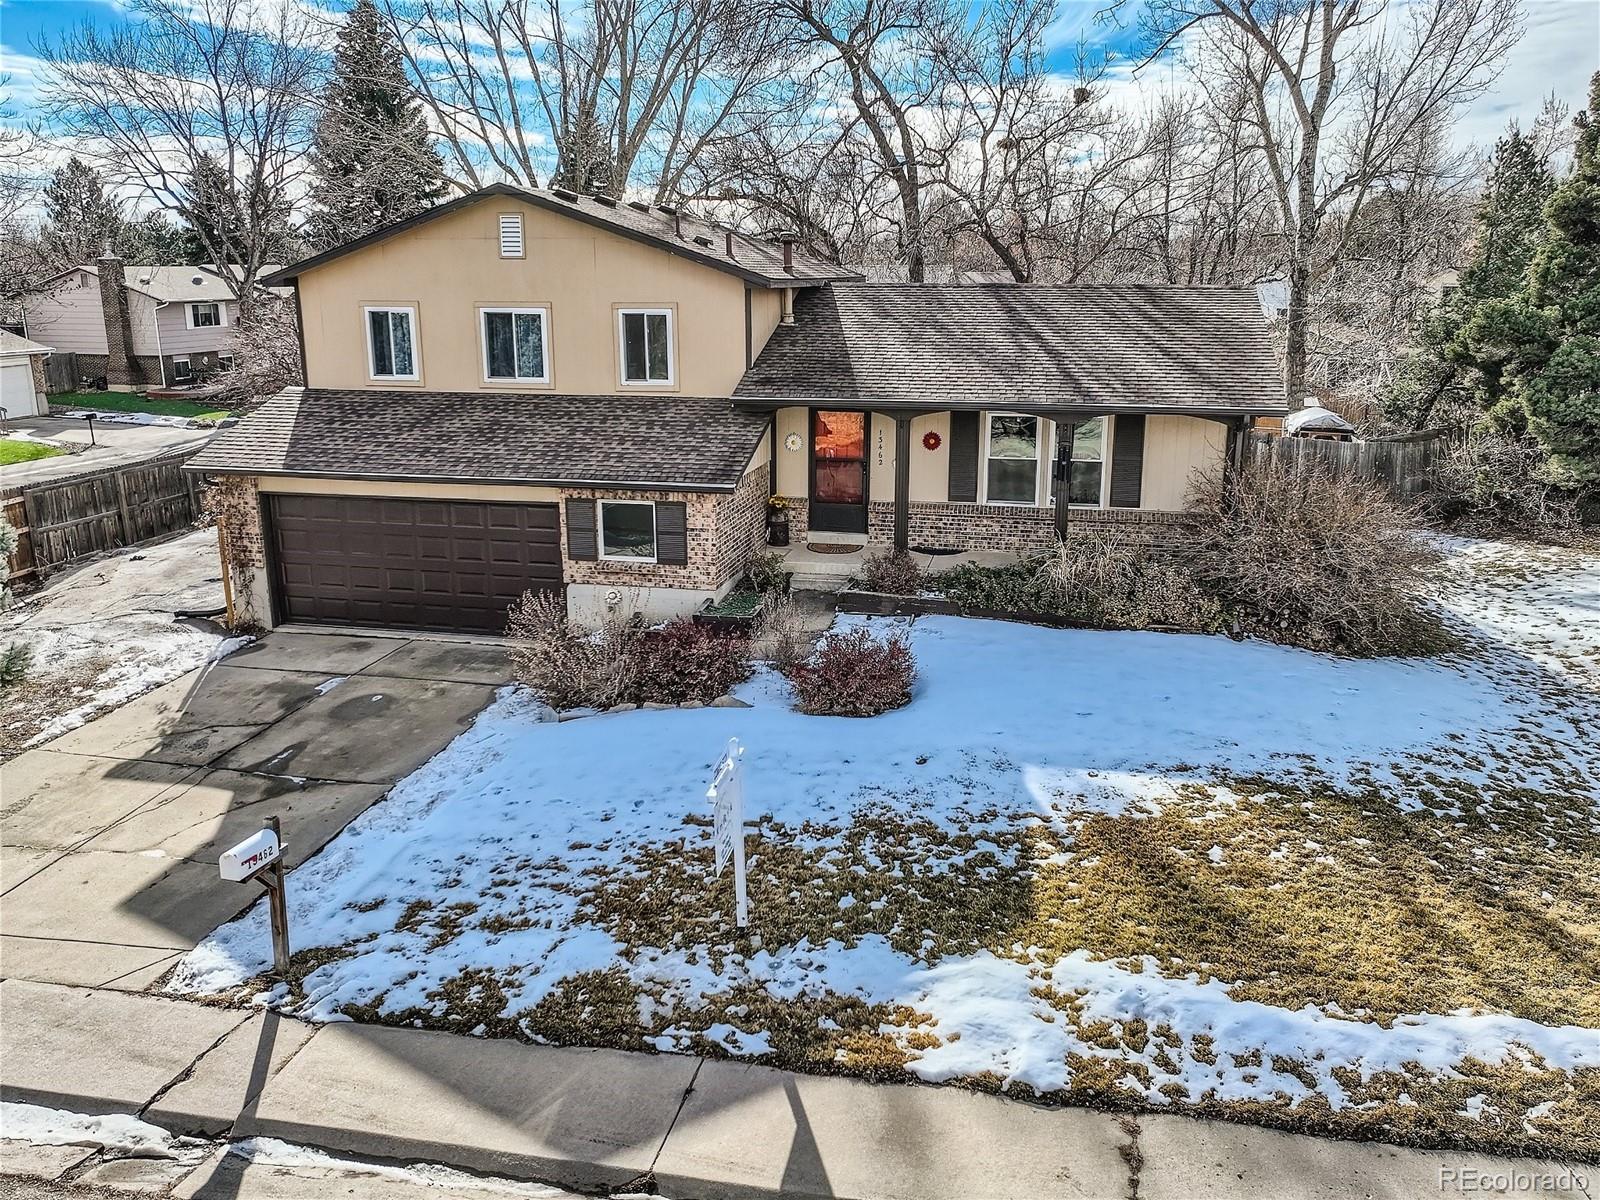 13462 w 70th place, Arvada sold home. Closed on 2024-02-21 for $660,000.